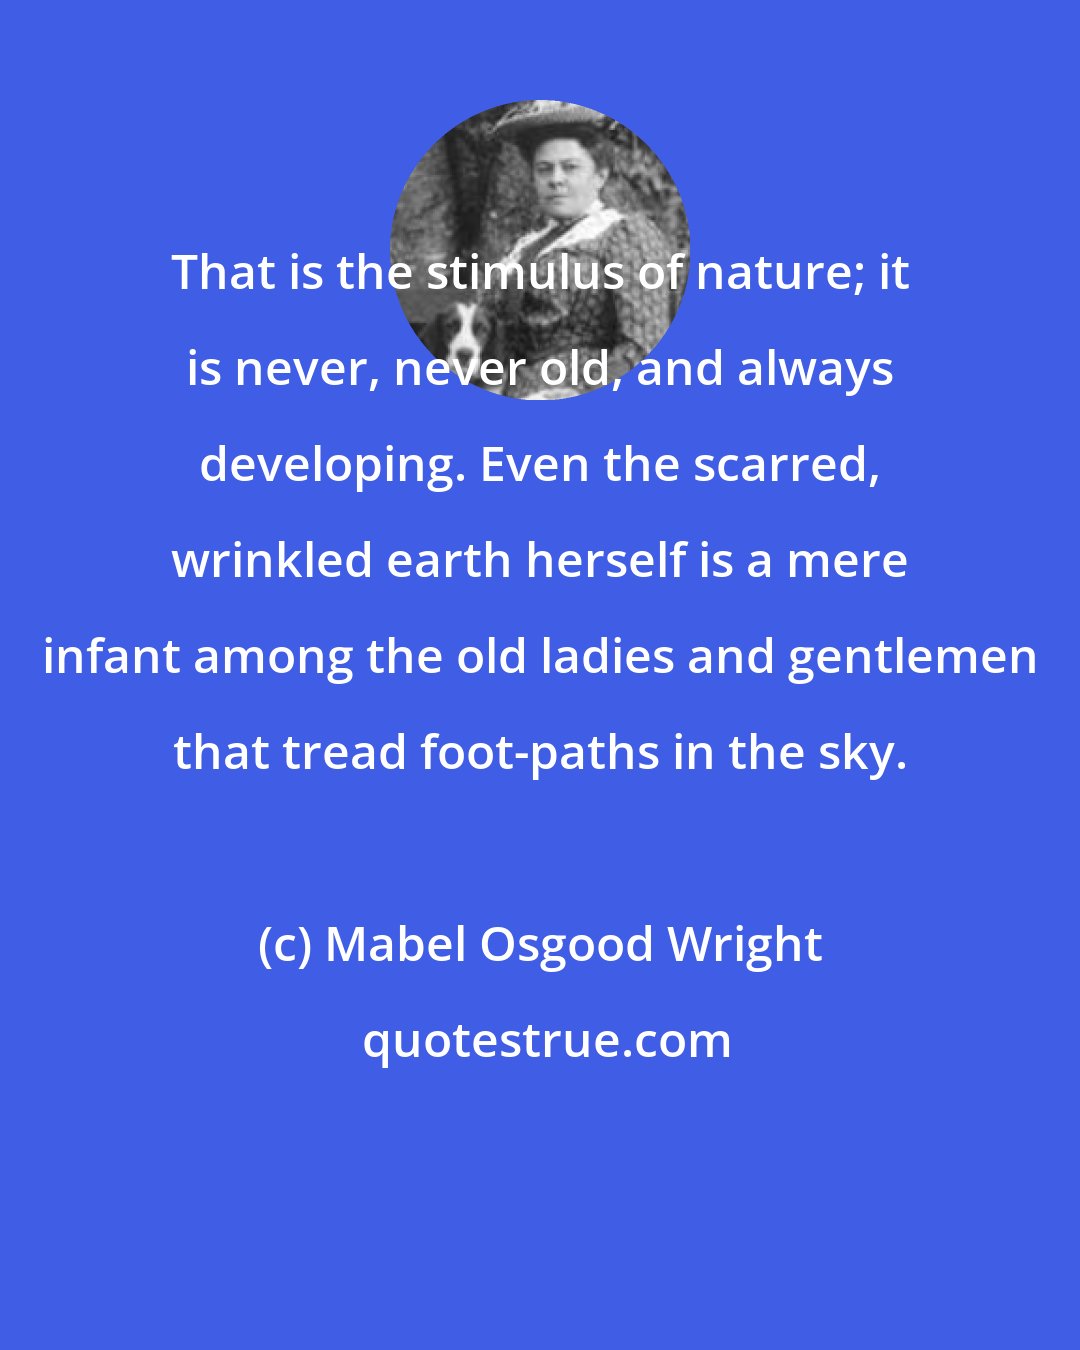 Mabel Osgood Wright: That is the stimulus of nature; it is never, never old, and always developing. Even the scarred, wrinkled earth herself is a mere infant among the old ladies and gentlemen that tread foot-paths in the sky.